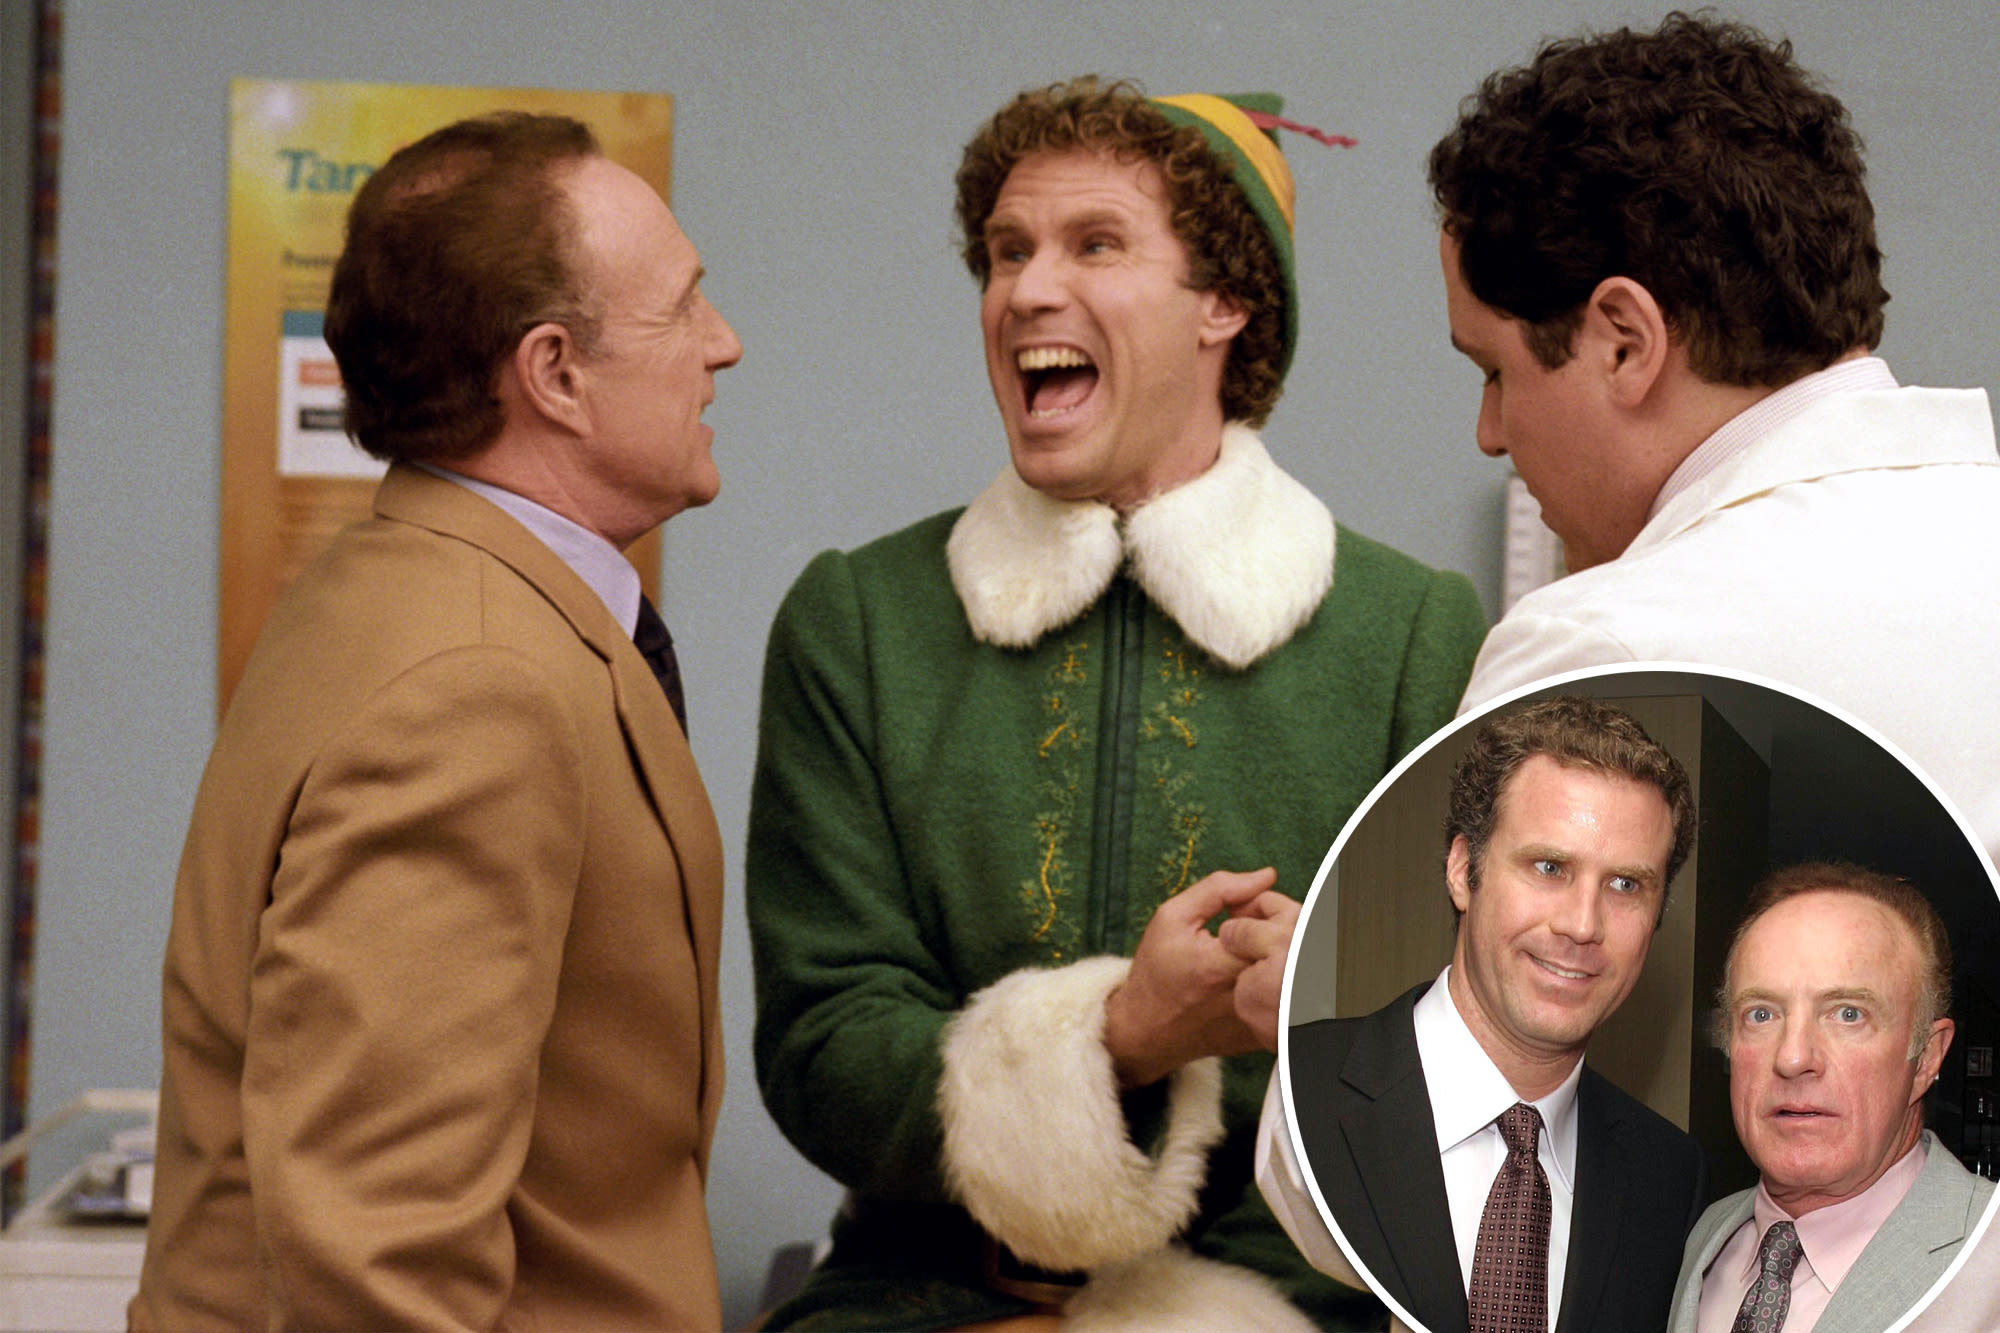 Will Ferrell says James Caan told him ‘you’re not funny’ on ‘Elf’ set: ‘Truly annoyed with me’